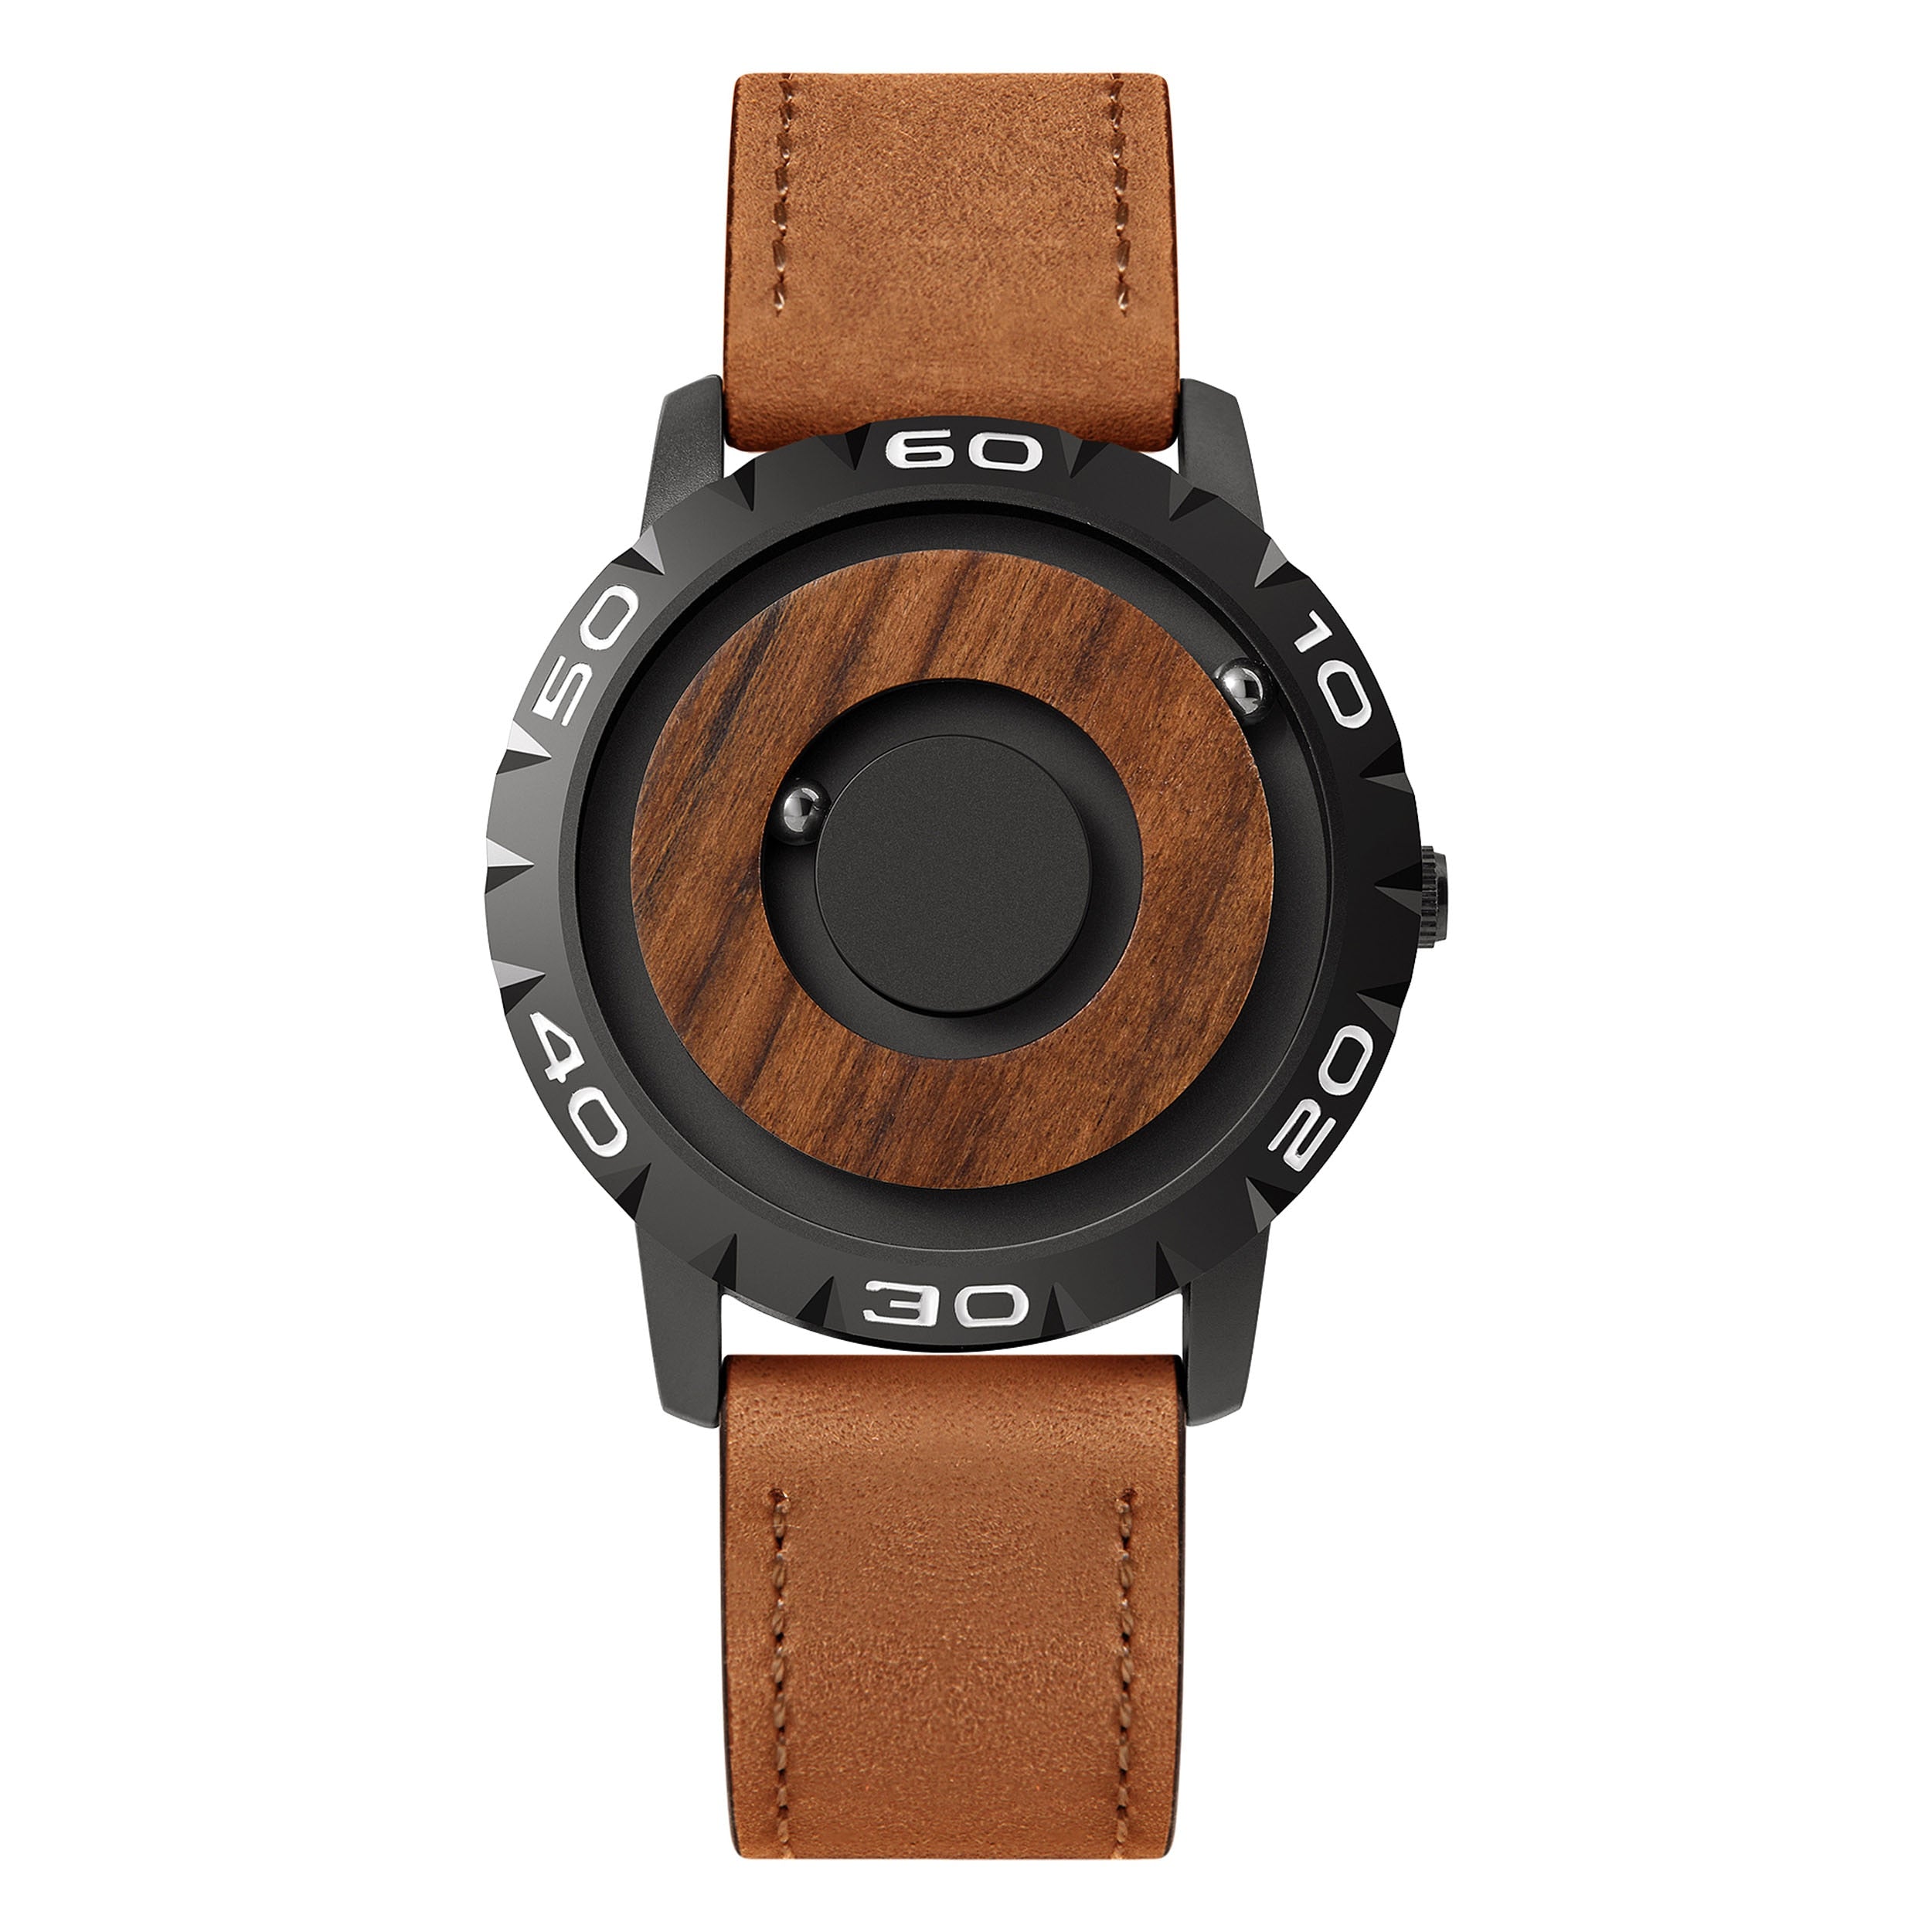 The Z1 Magnetic Watch